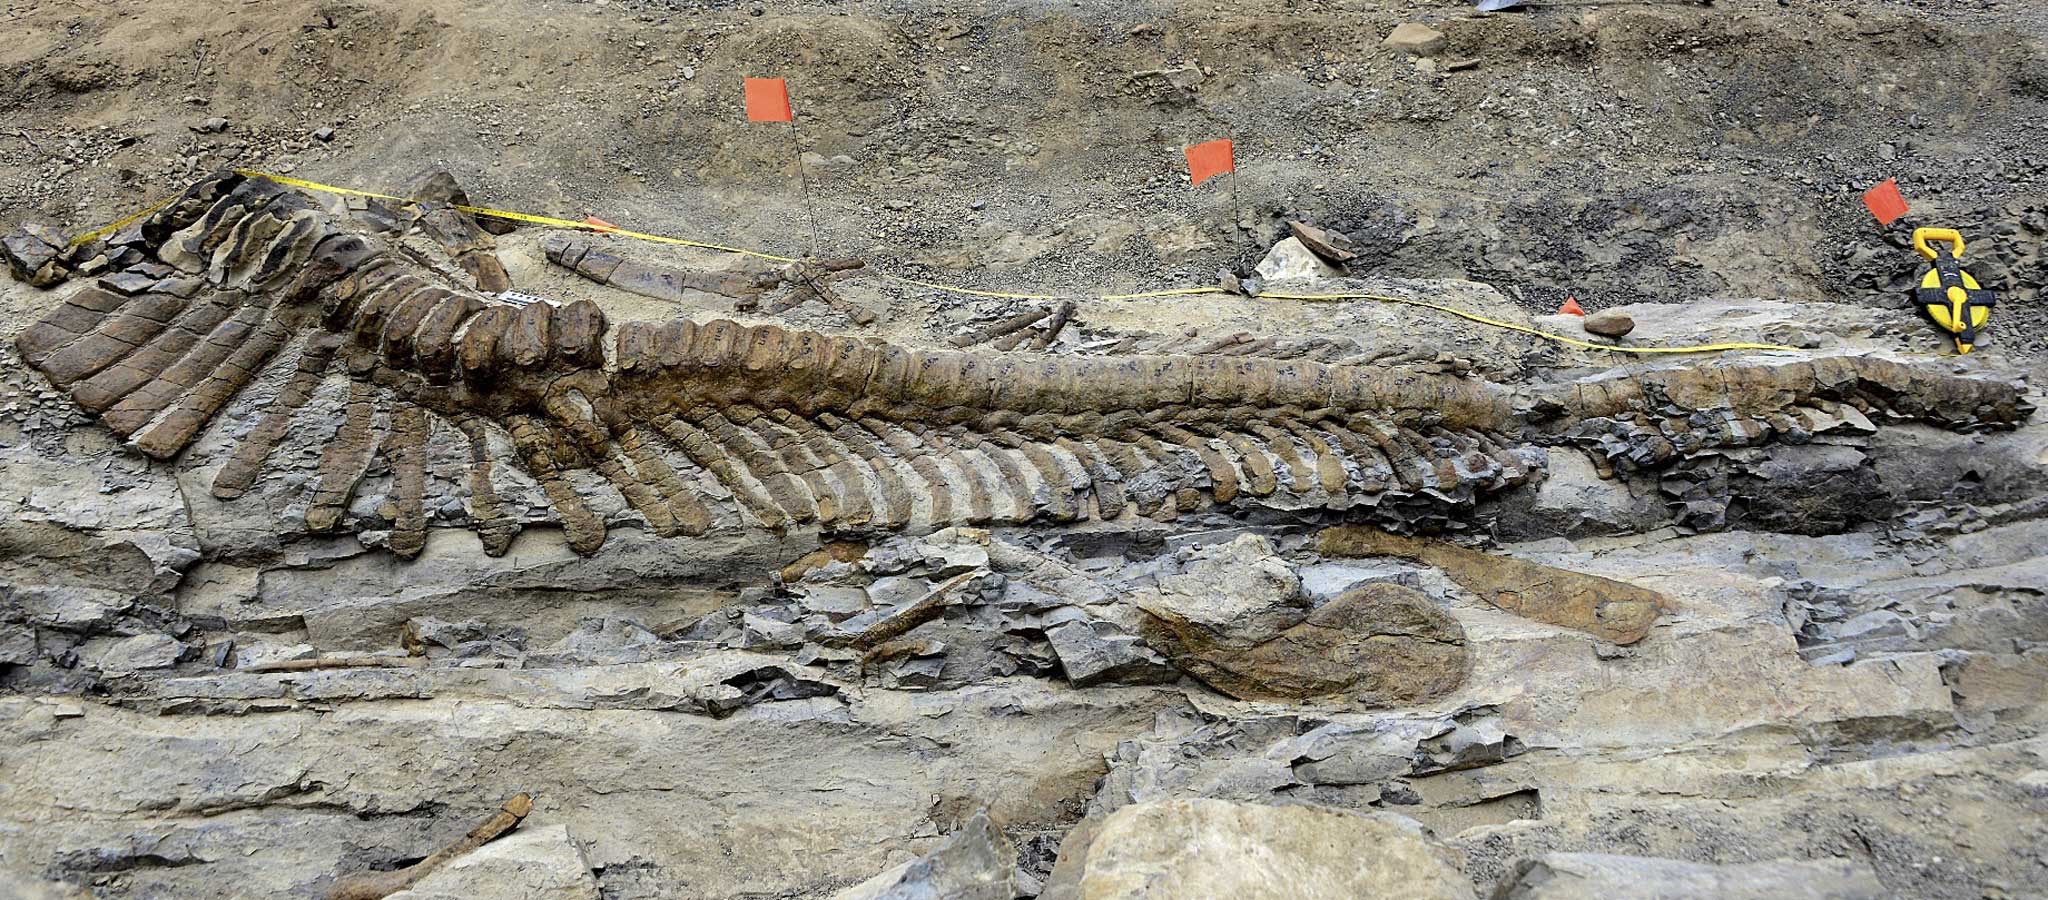 The tail was uncovered near General Cepeda in Mexico